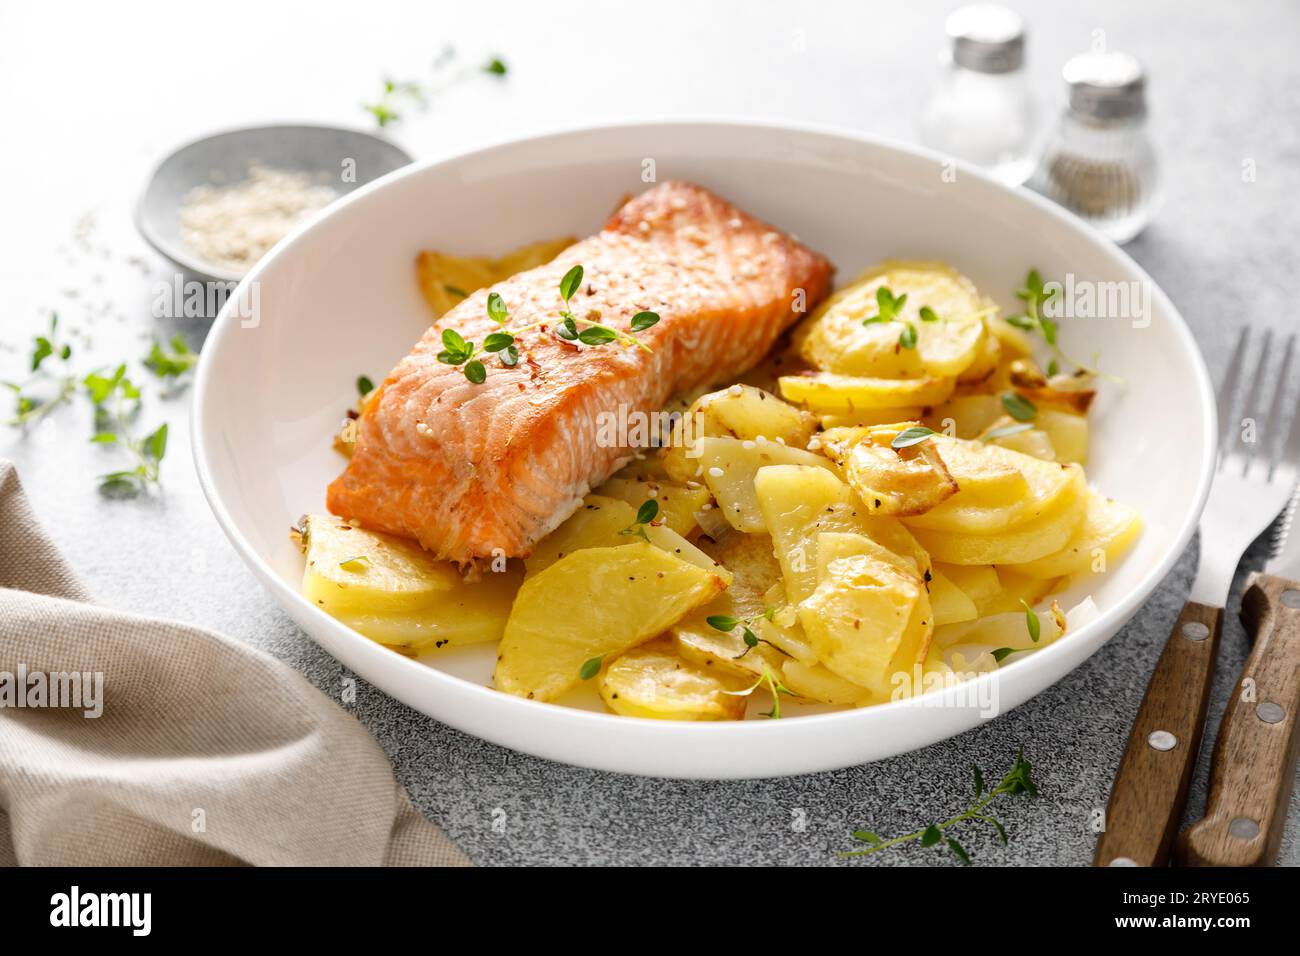 Salmon grilled and baked potato with onions Stock Photo